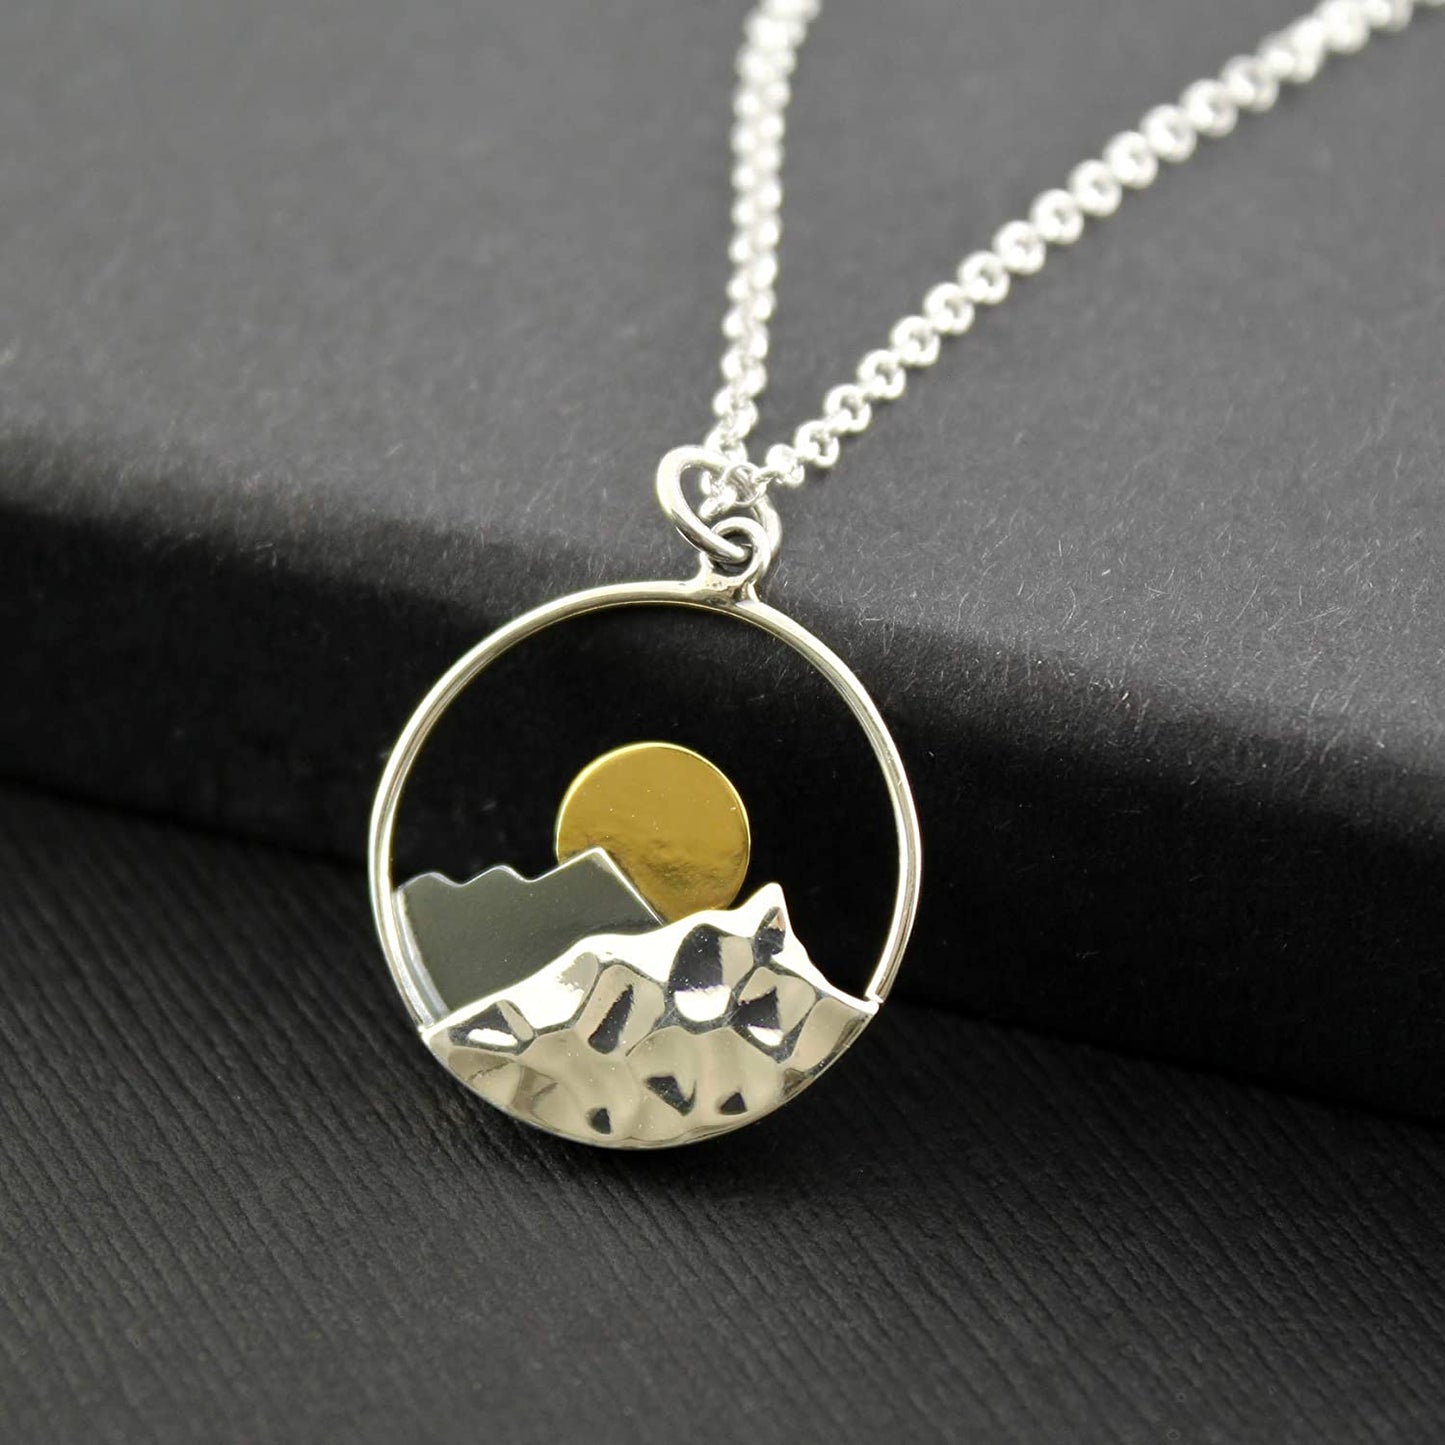 Retirement Gift for Women • 925 Sterling Silver • Large Mountain Charm Necklace • Service Appreciation Jewelry • Friend Teacher Nurse Work Colleague • And so the Adventure Begins